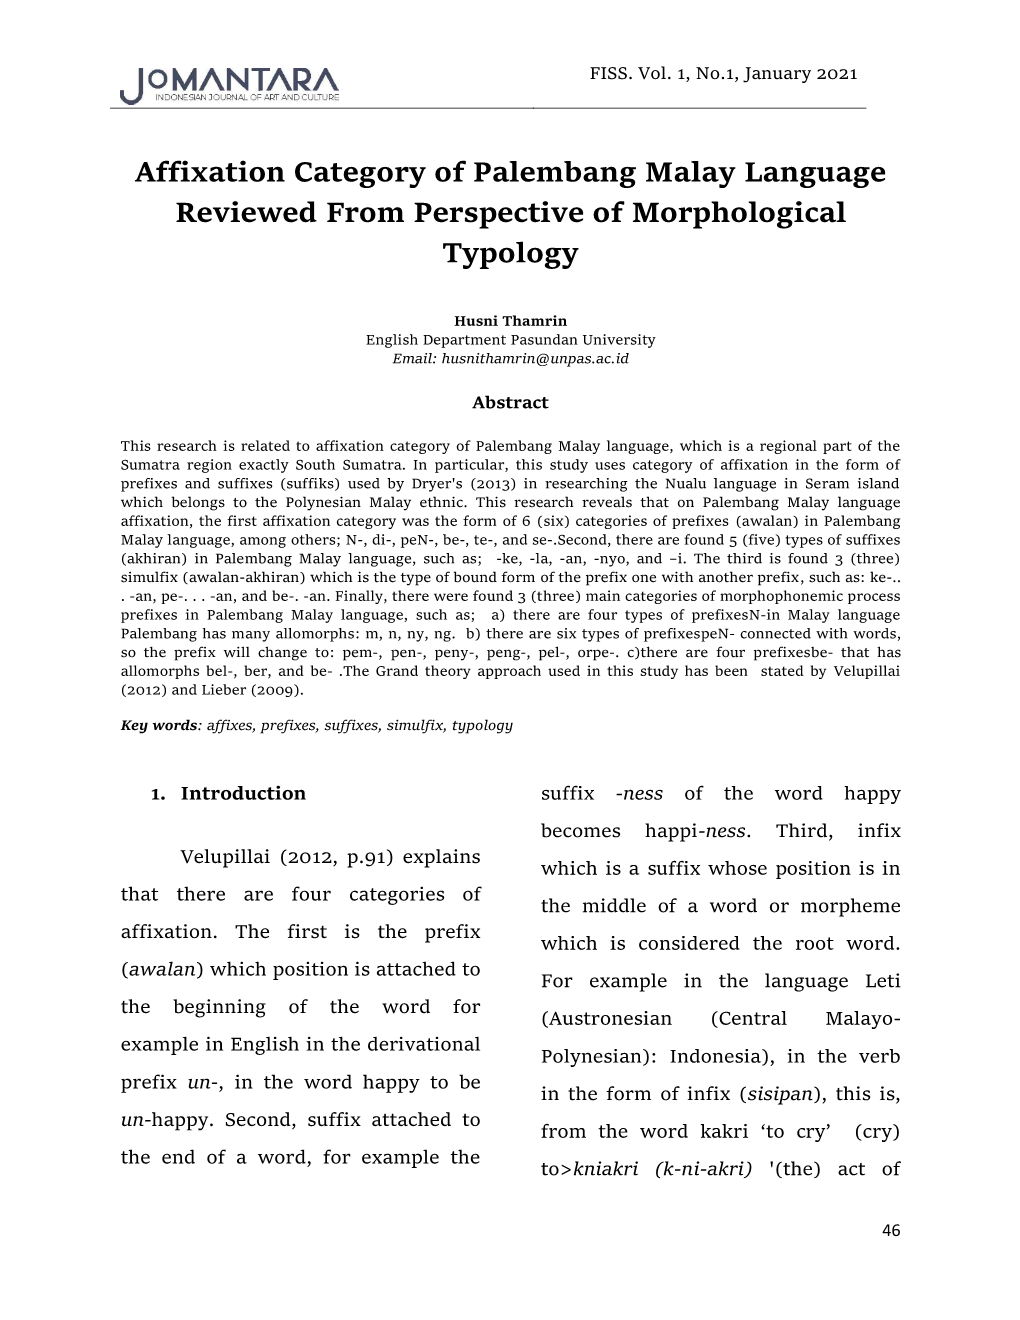 Affixation Category of Palembang Malay Language Reviewed from Perspective of Morphological Typology